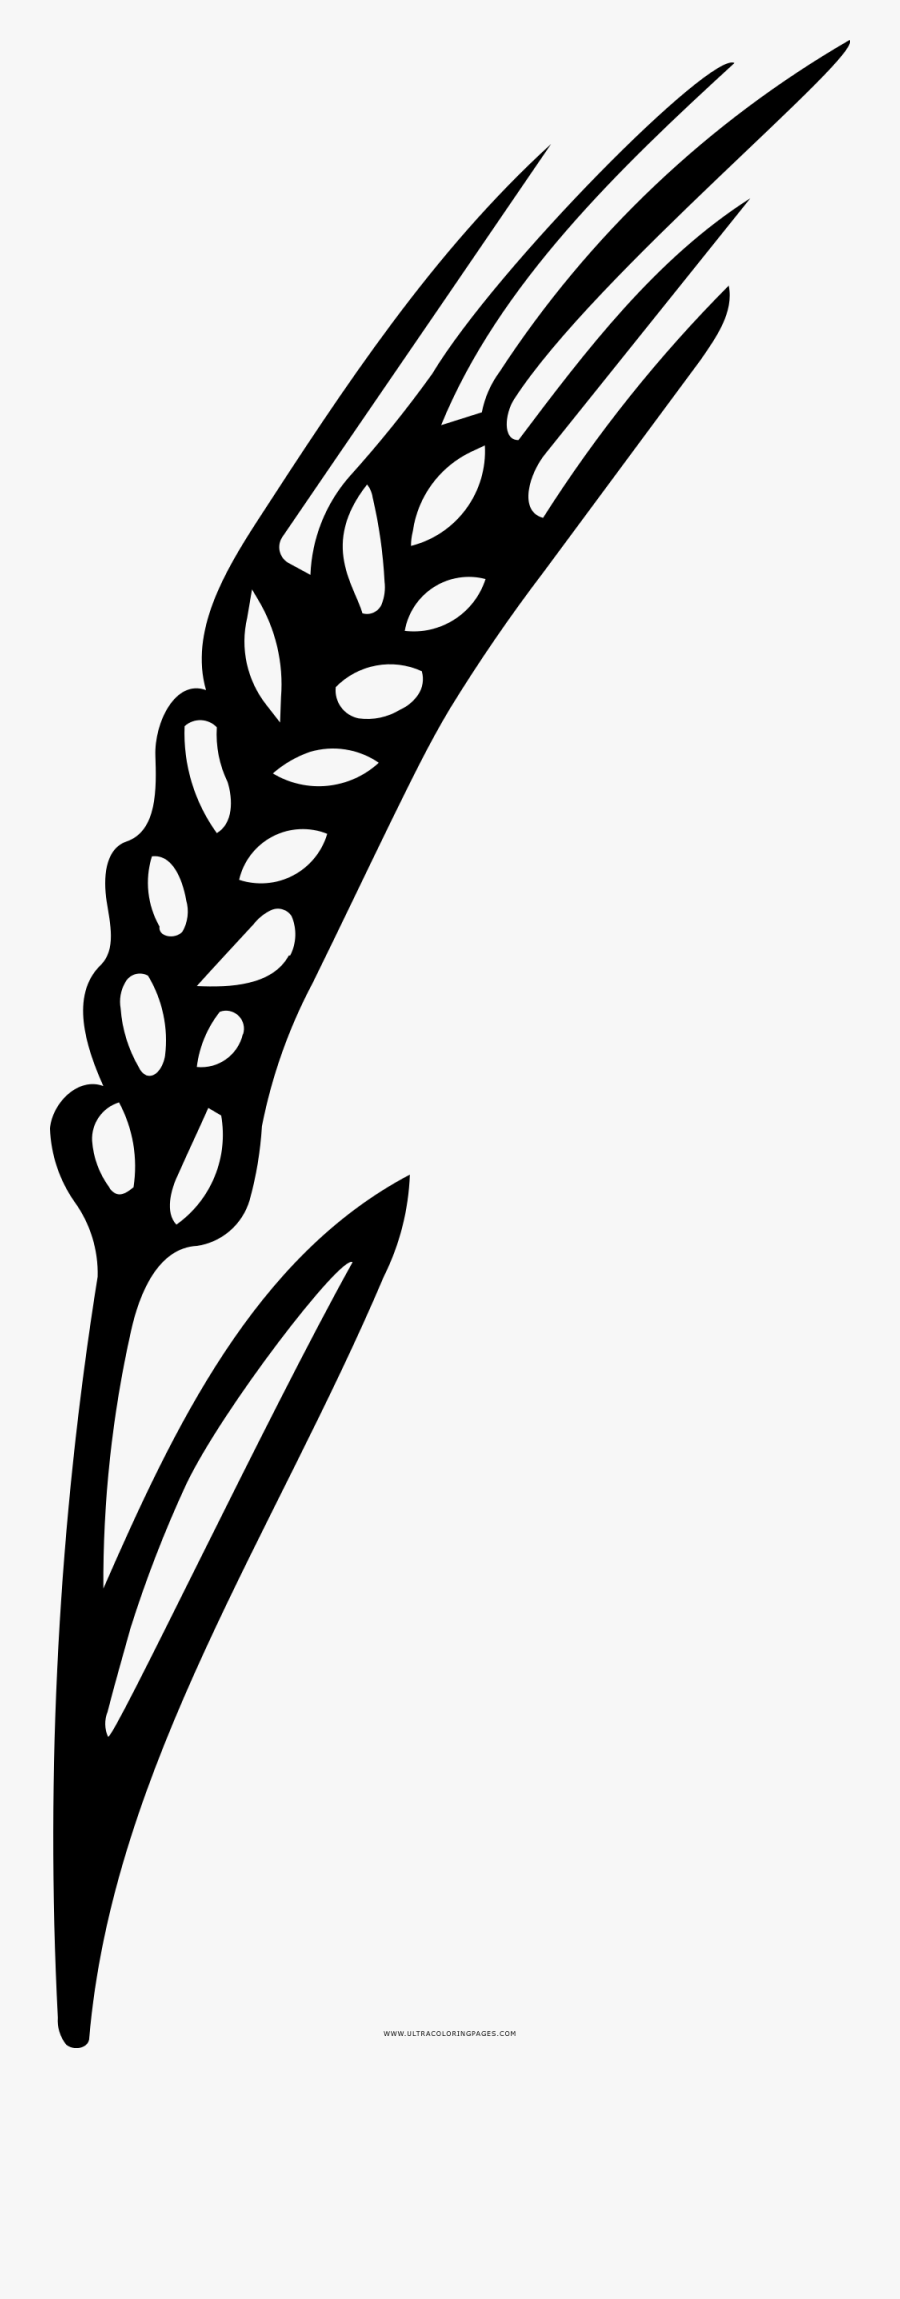 Barley Coloring Page, Transparent Clipart